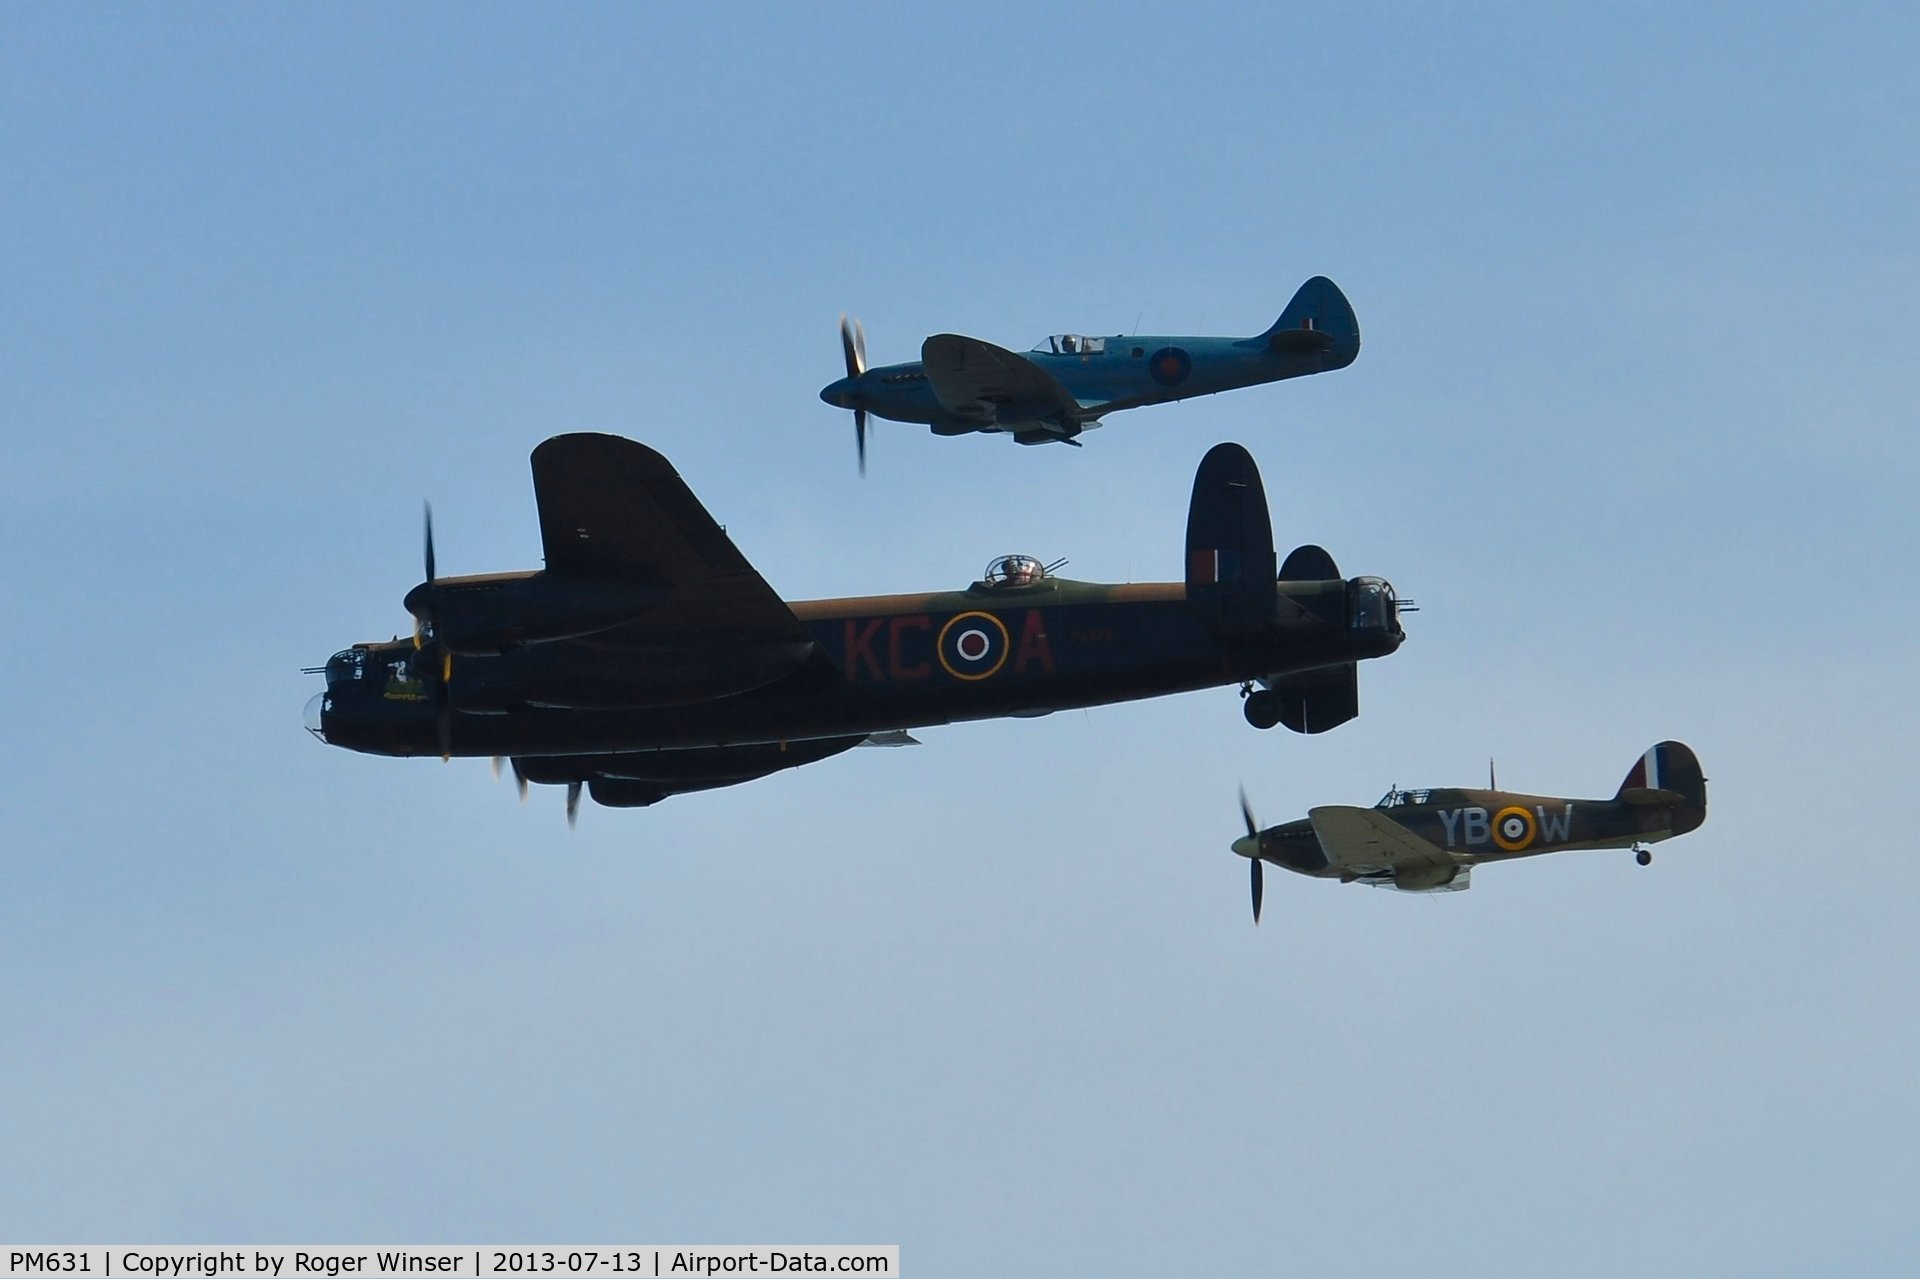 PM631, 1945 Supermarine 389 Spitfire PR.XIX C/N 6S/683528, Off airport. Five Merlins and a Griffon. One of the BBMF's R-R Griffon powered Spitfire PR. XIX aircraft in formation with Avro Lancaster B.I PA474 coded KC-A and Hurricane II.c LF363 coded YB-W. Displaying on the first day of the Wales National Air Show,